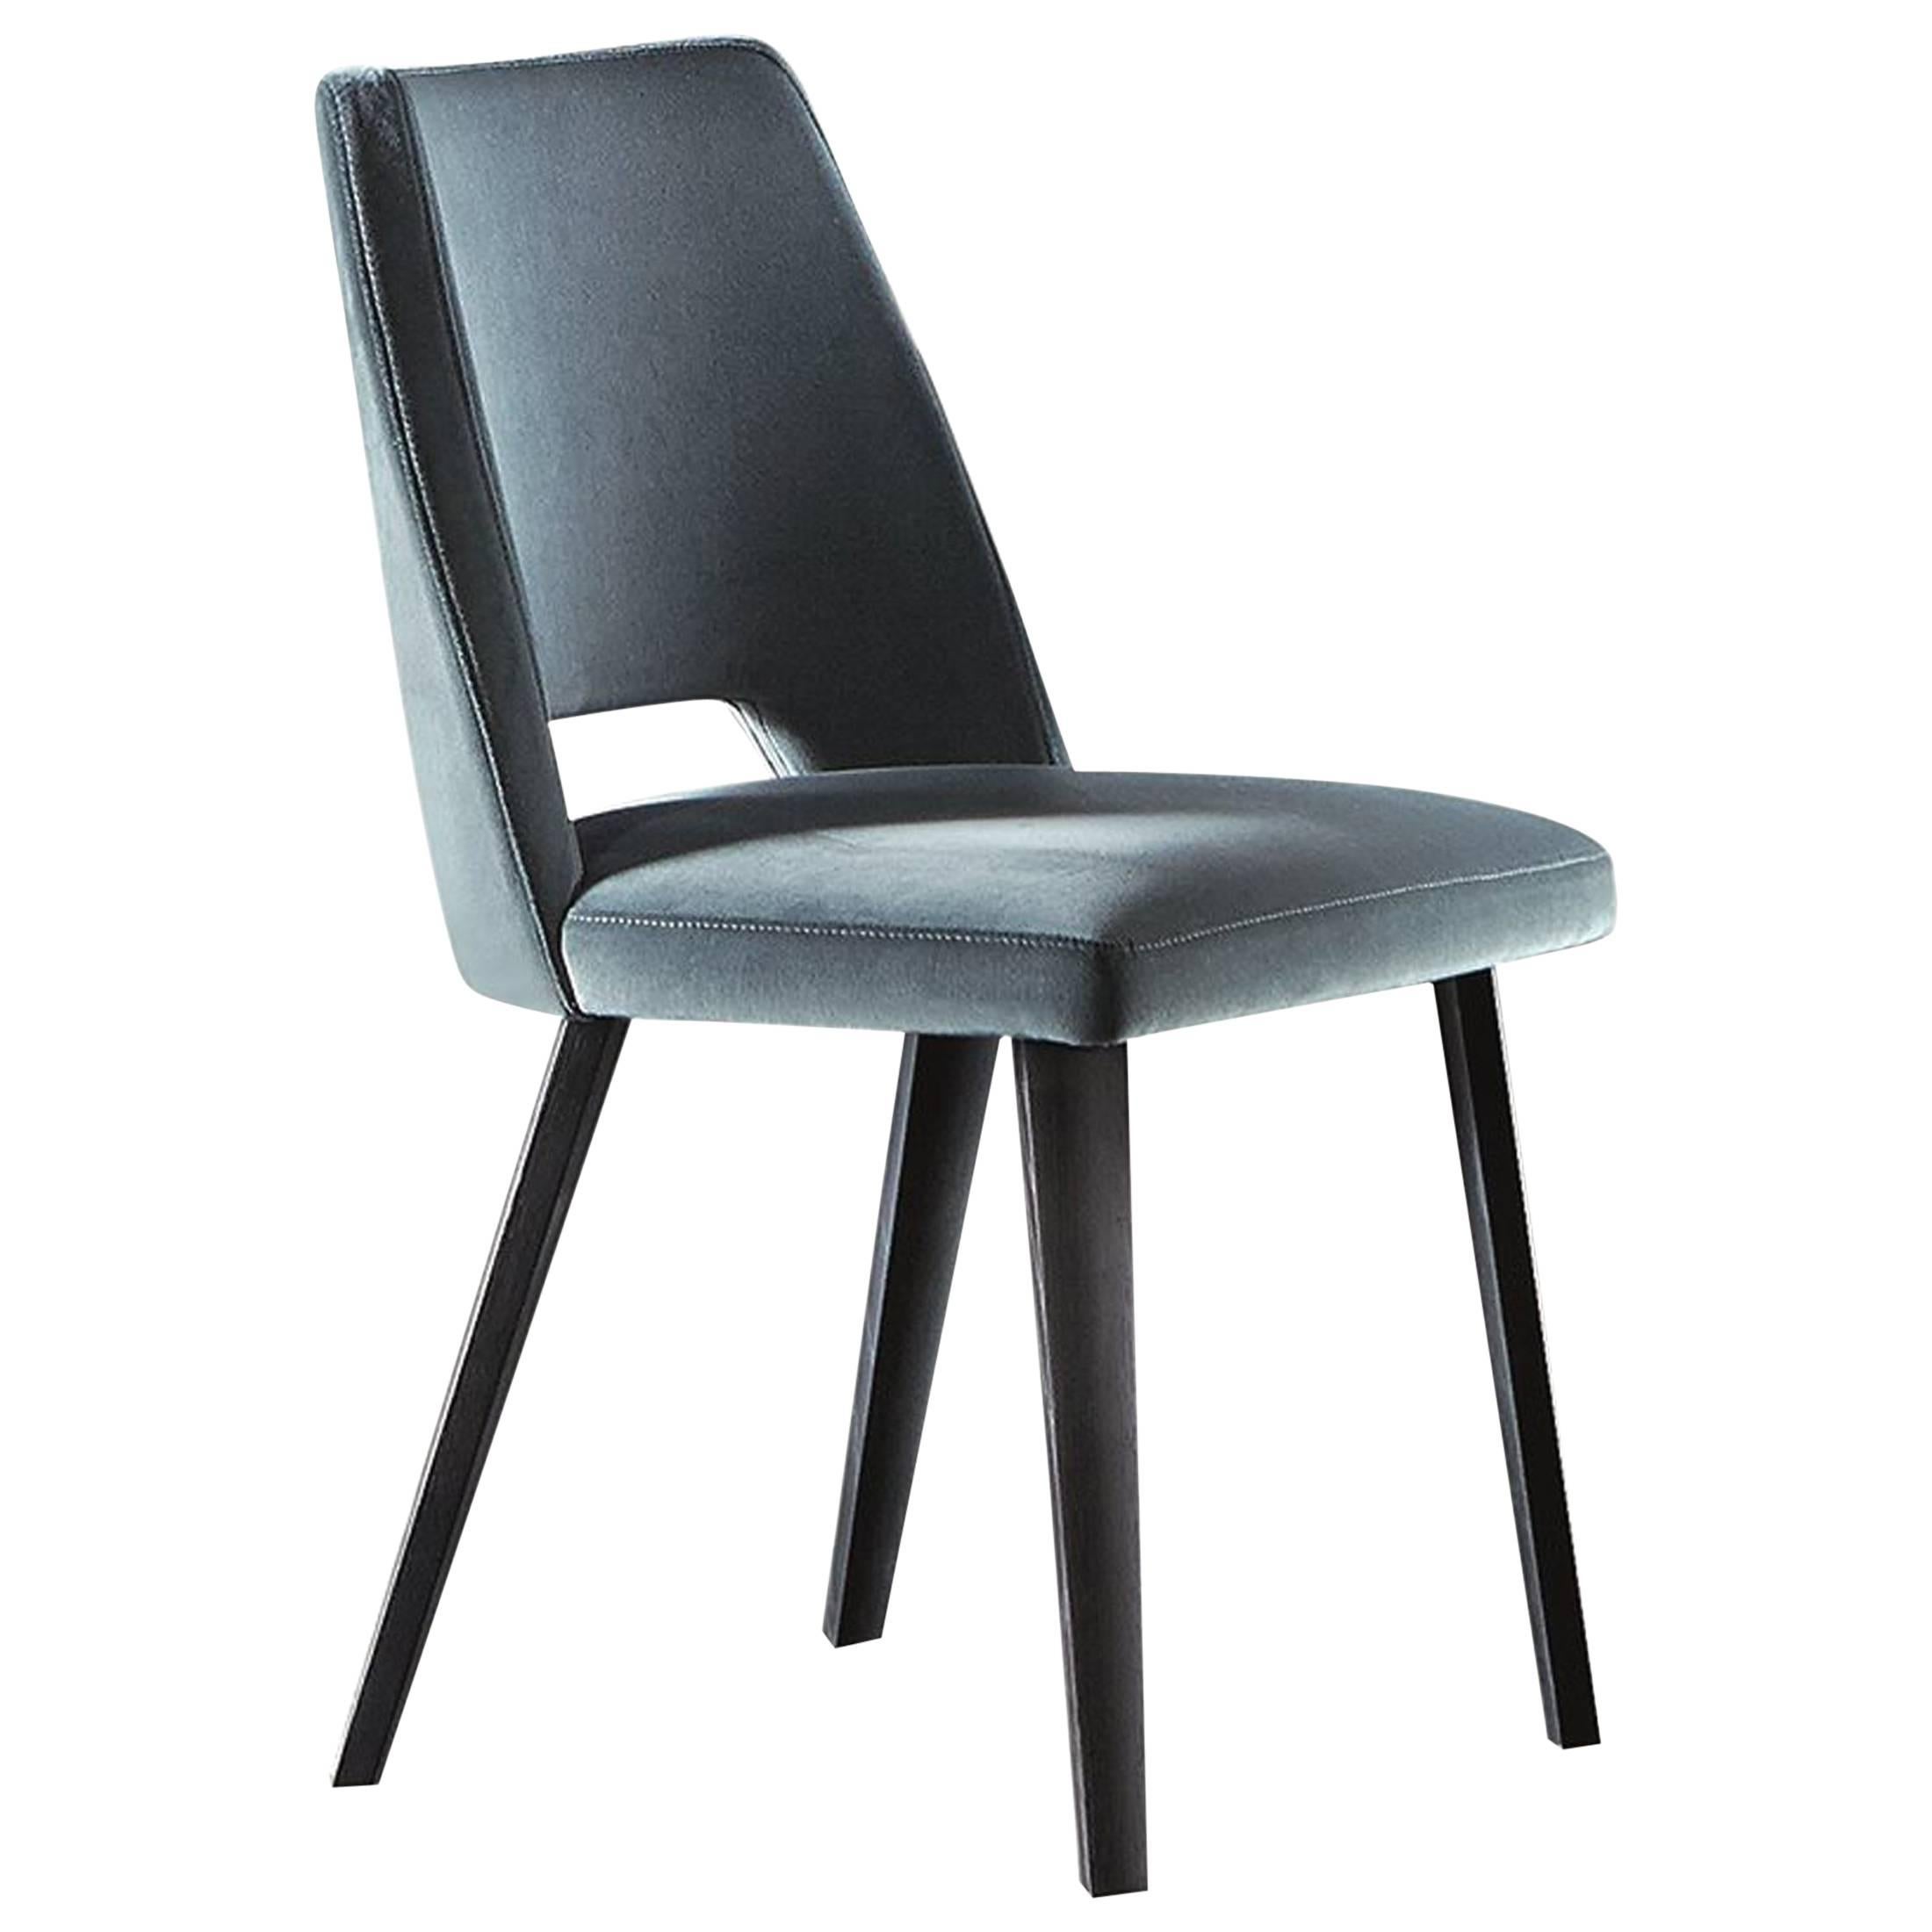 Thea Dining Chair with Upholstered Seat and Backrest and Wooden Legs For Sale